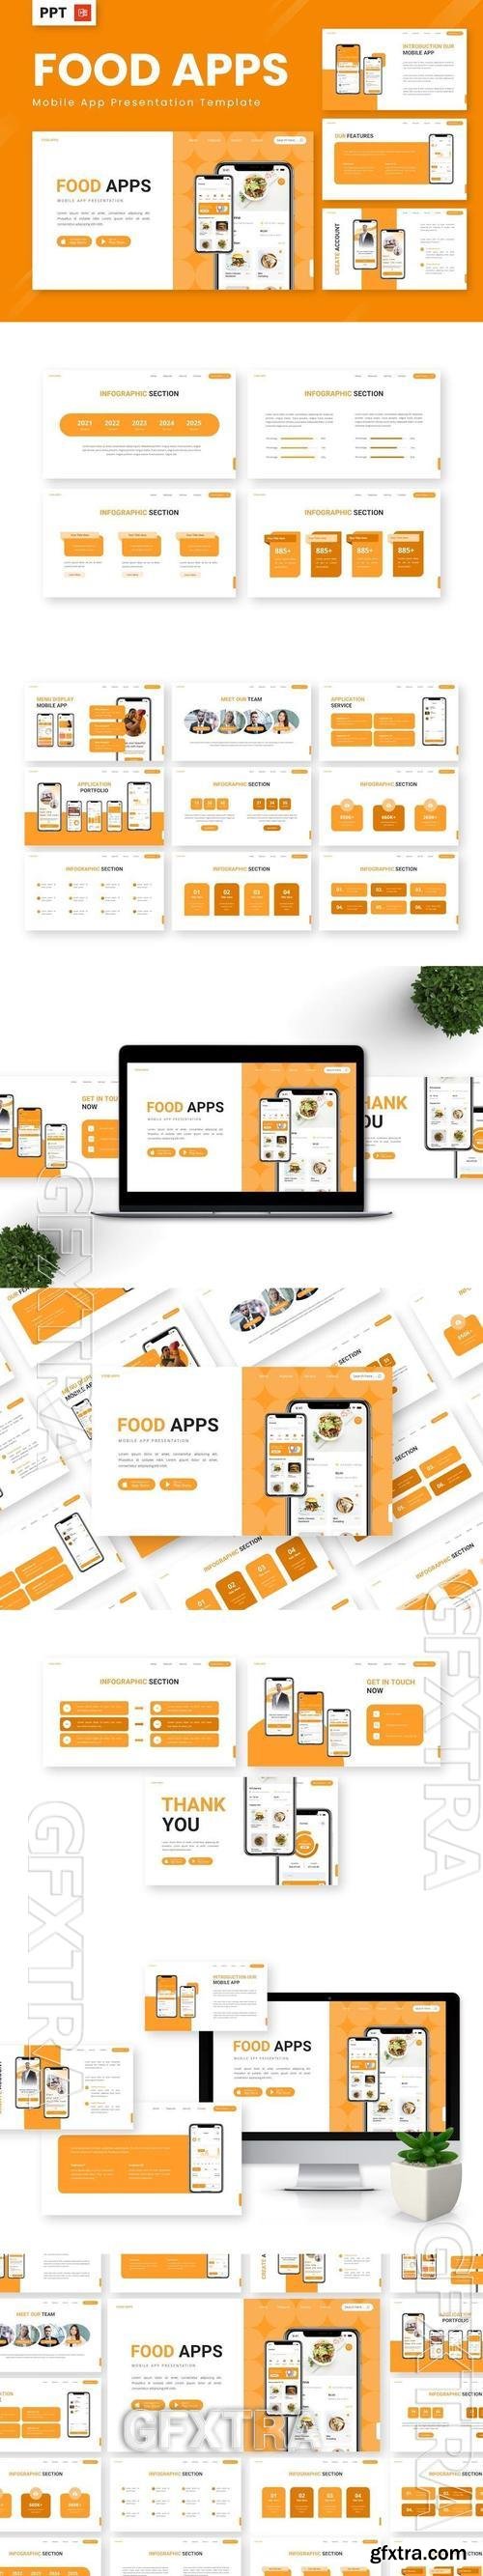 Food Apps - Mobile App Powerpoint Templates K94HEZC